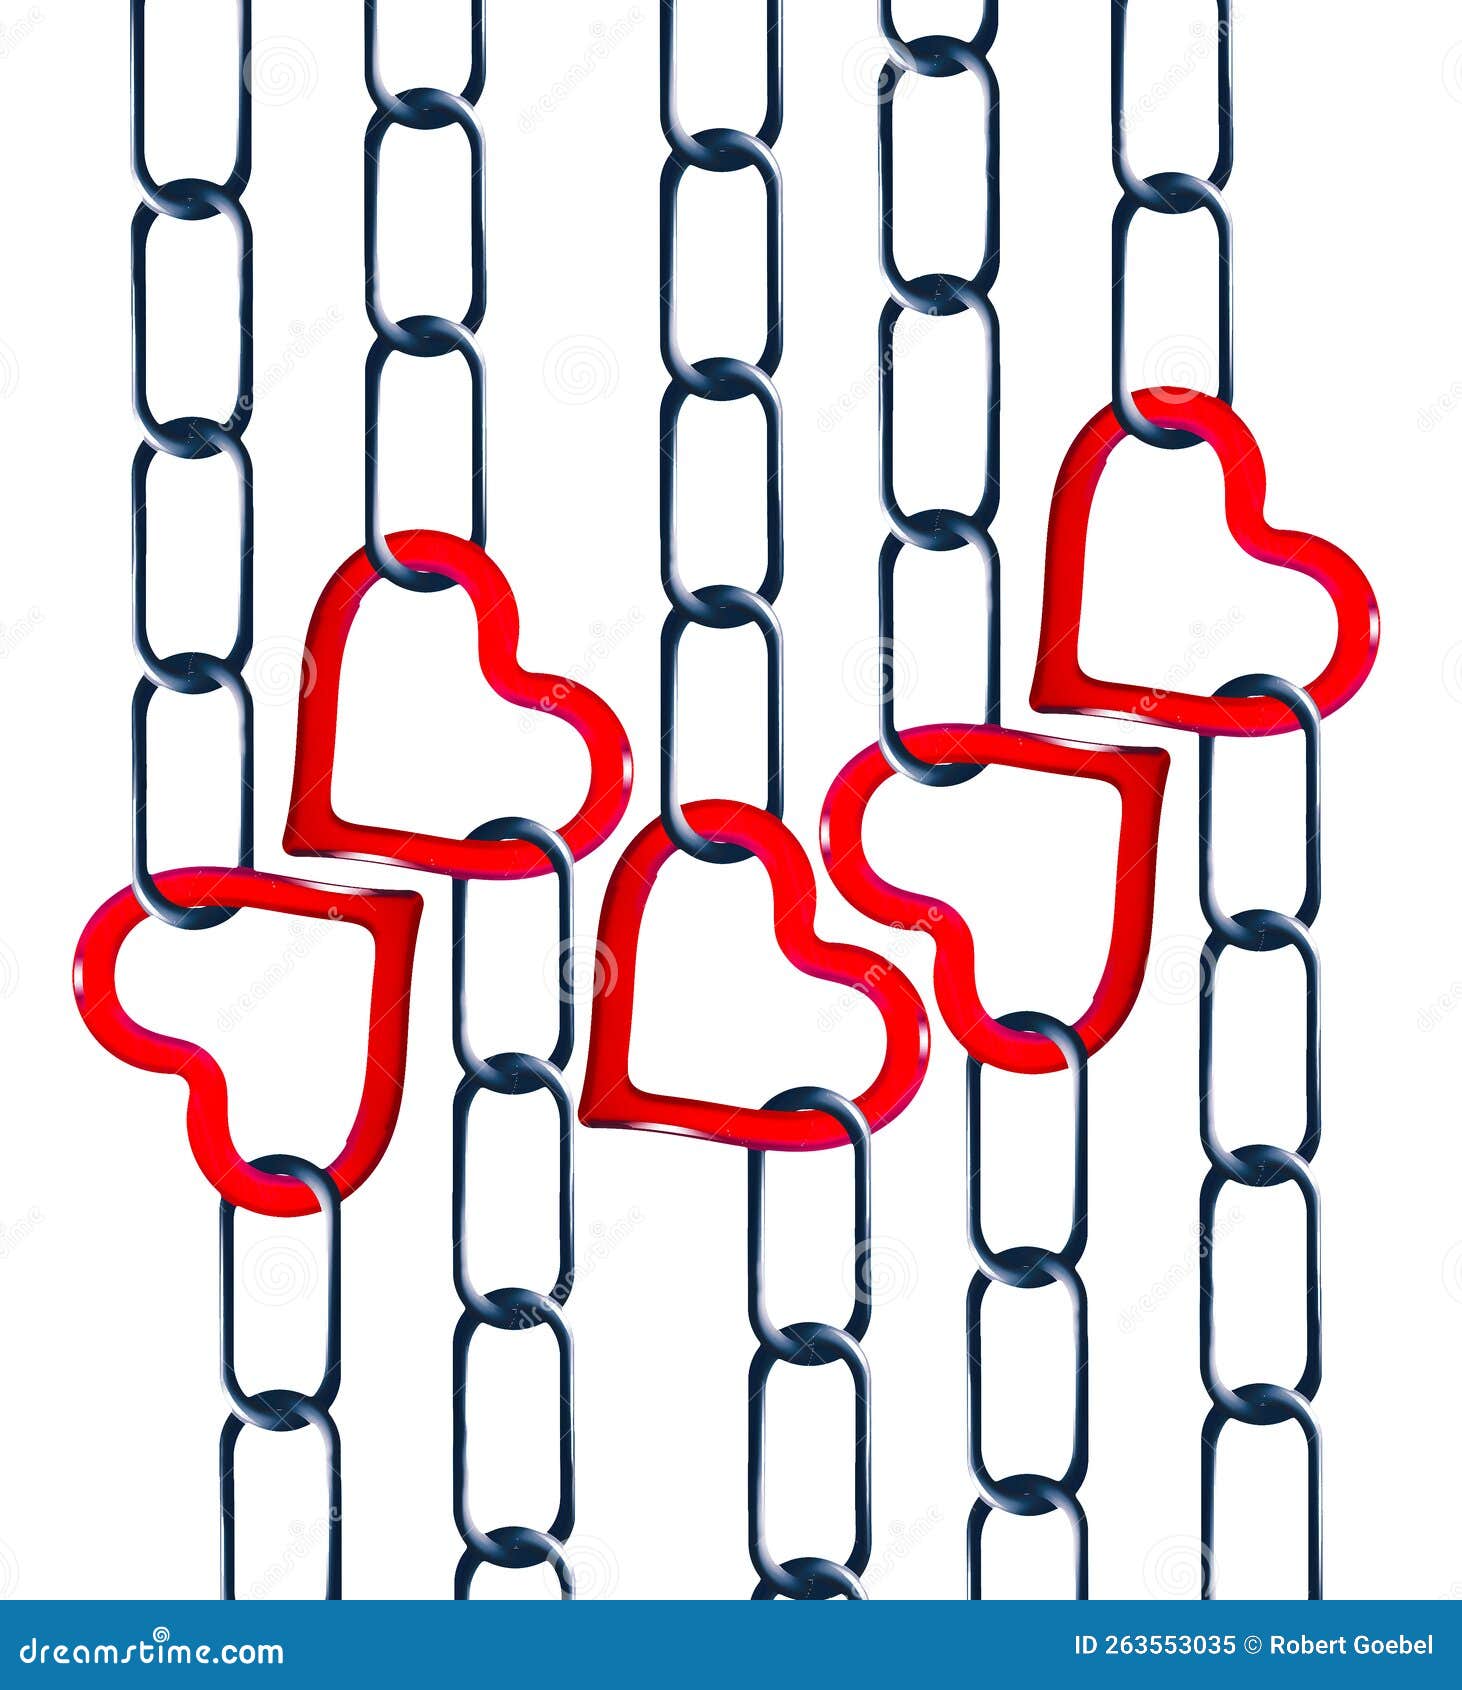 hearts and chains are pictured in a background image